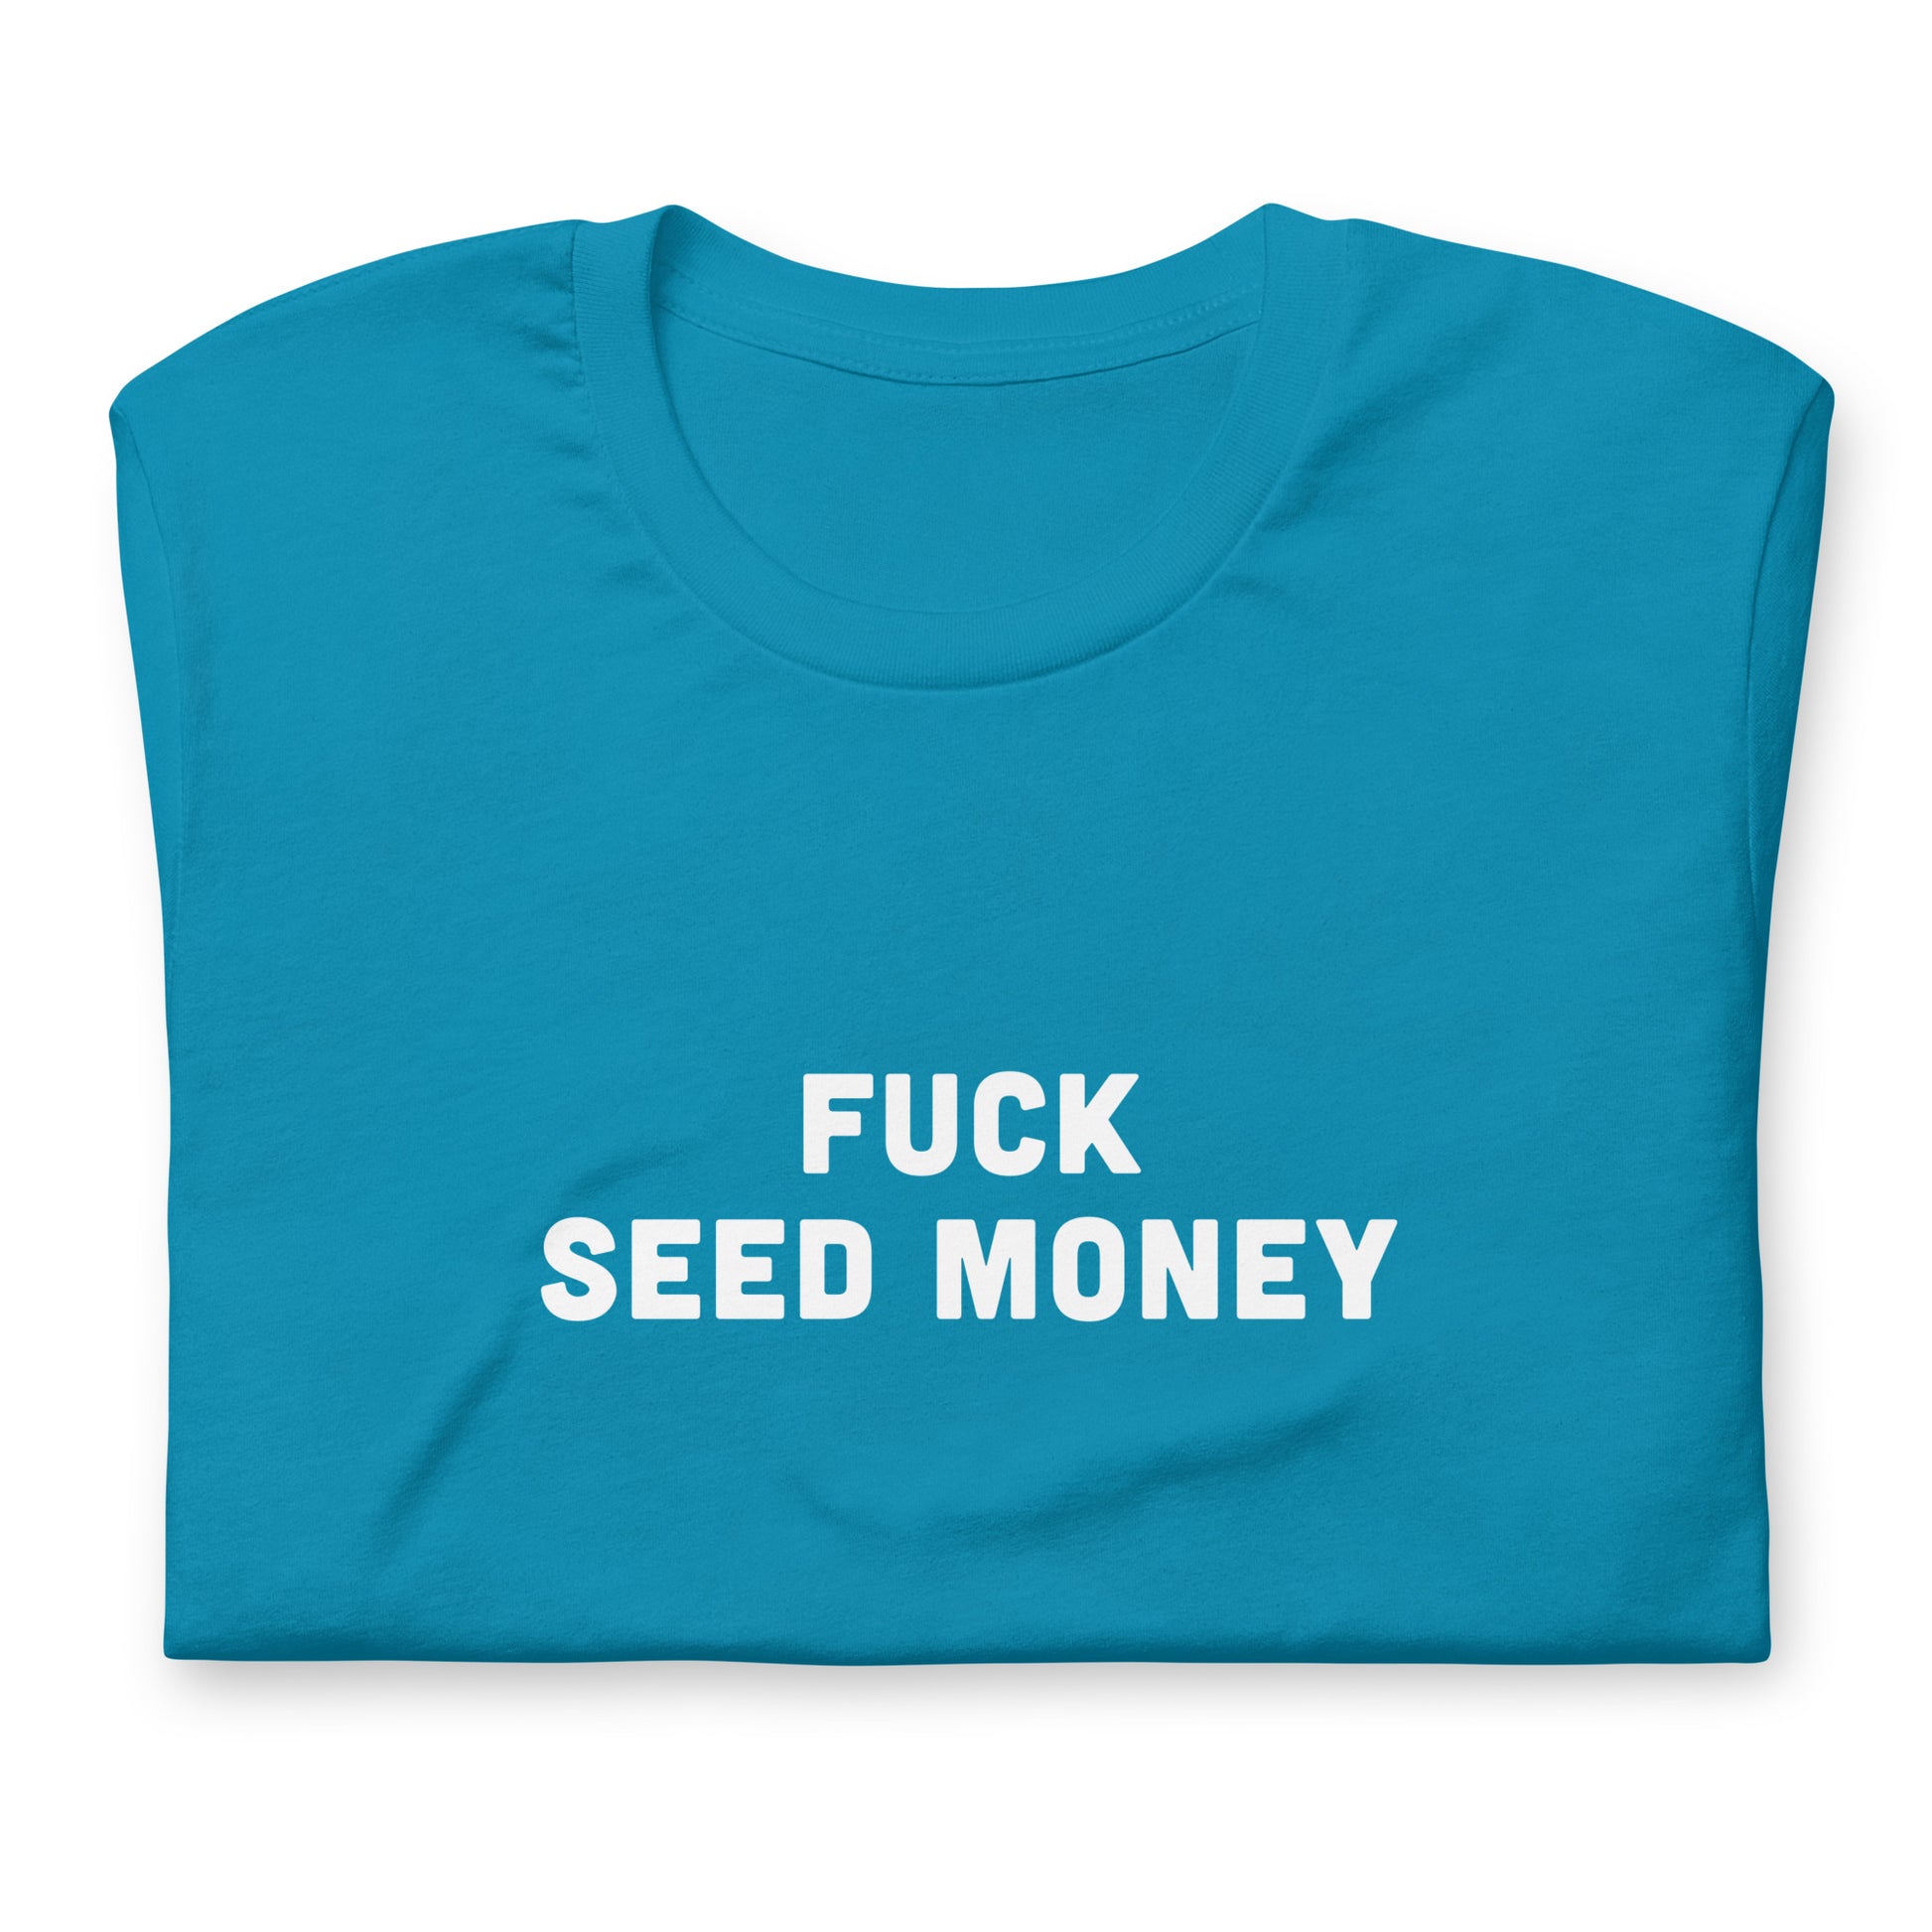 Fuck Seed Money T-Shirt Size M Color Navy